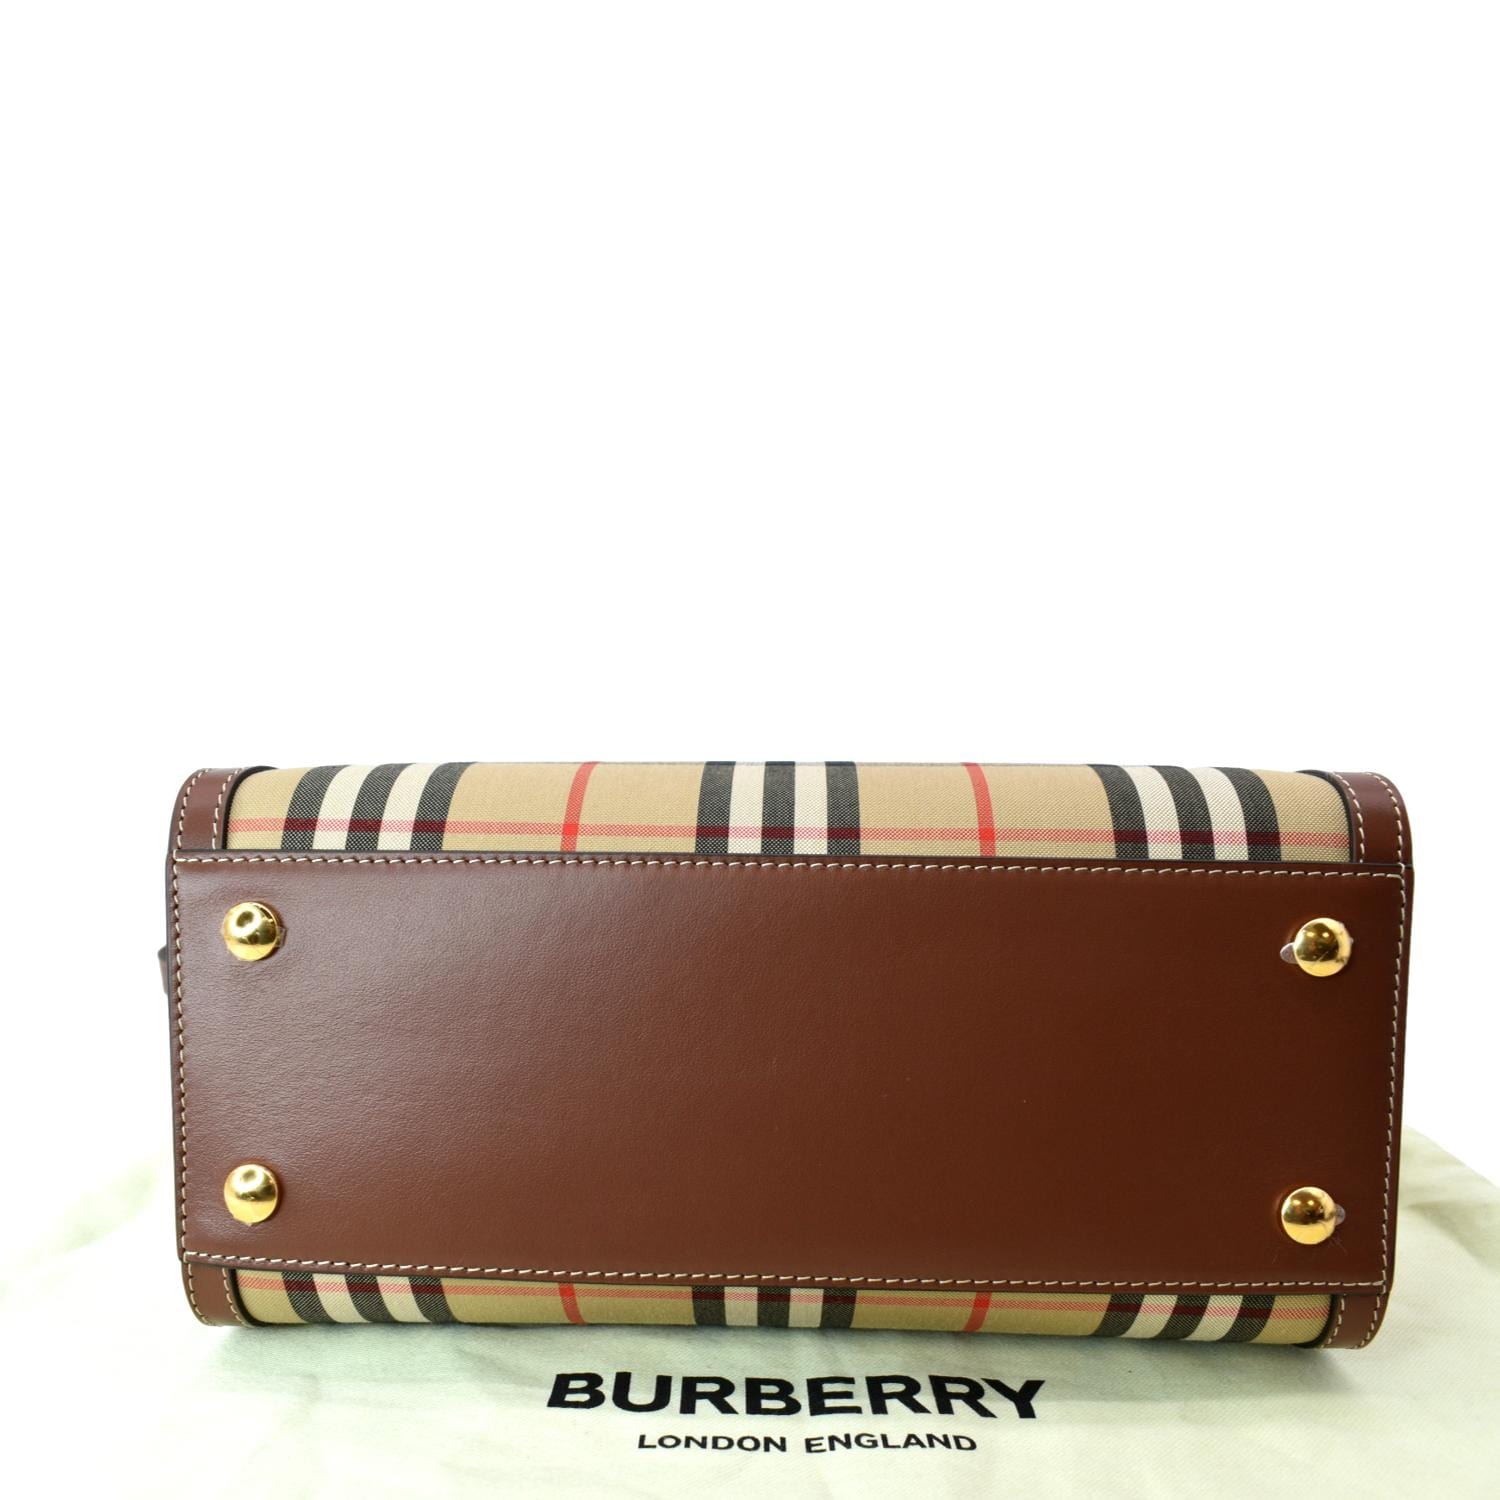 🛍3 DAY SALE🛍 Vintage Burberry wallet  Burberry wallet, Vintage burberry,  Wallet